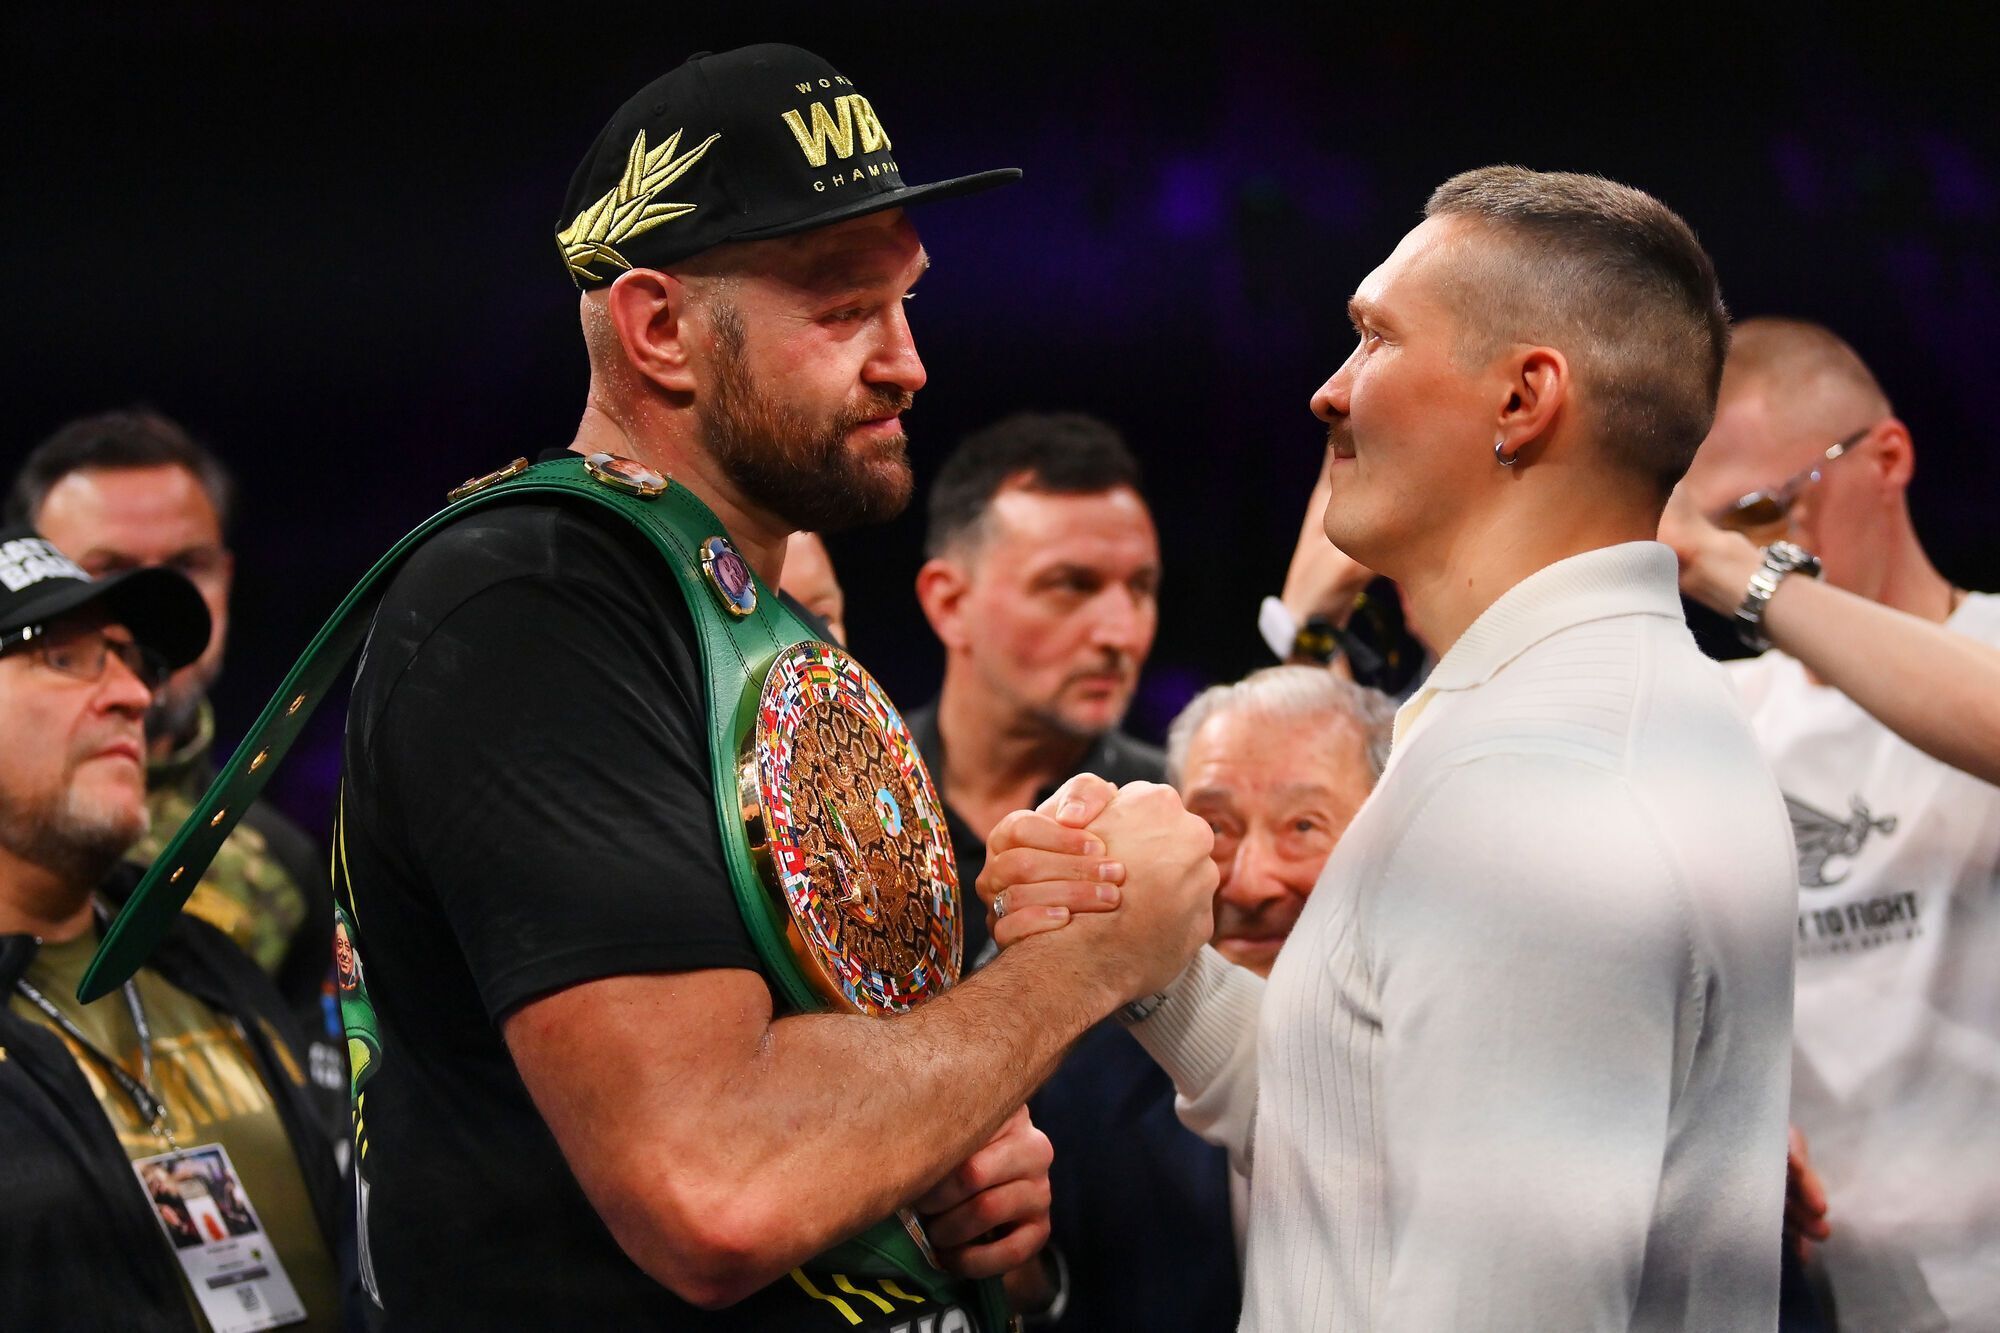 The difference is shrinking: bookmakers have changed the odds for the Usyk-Fury fight again